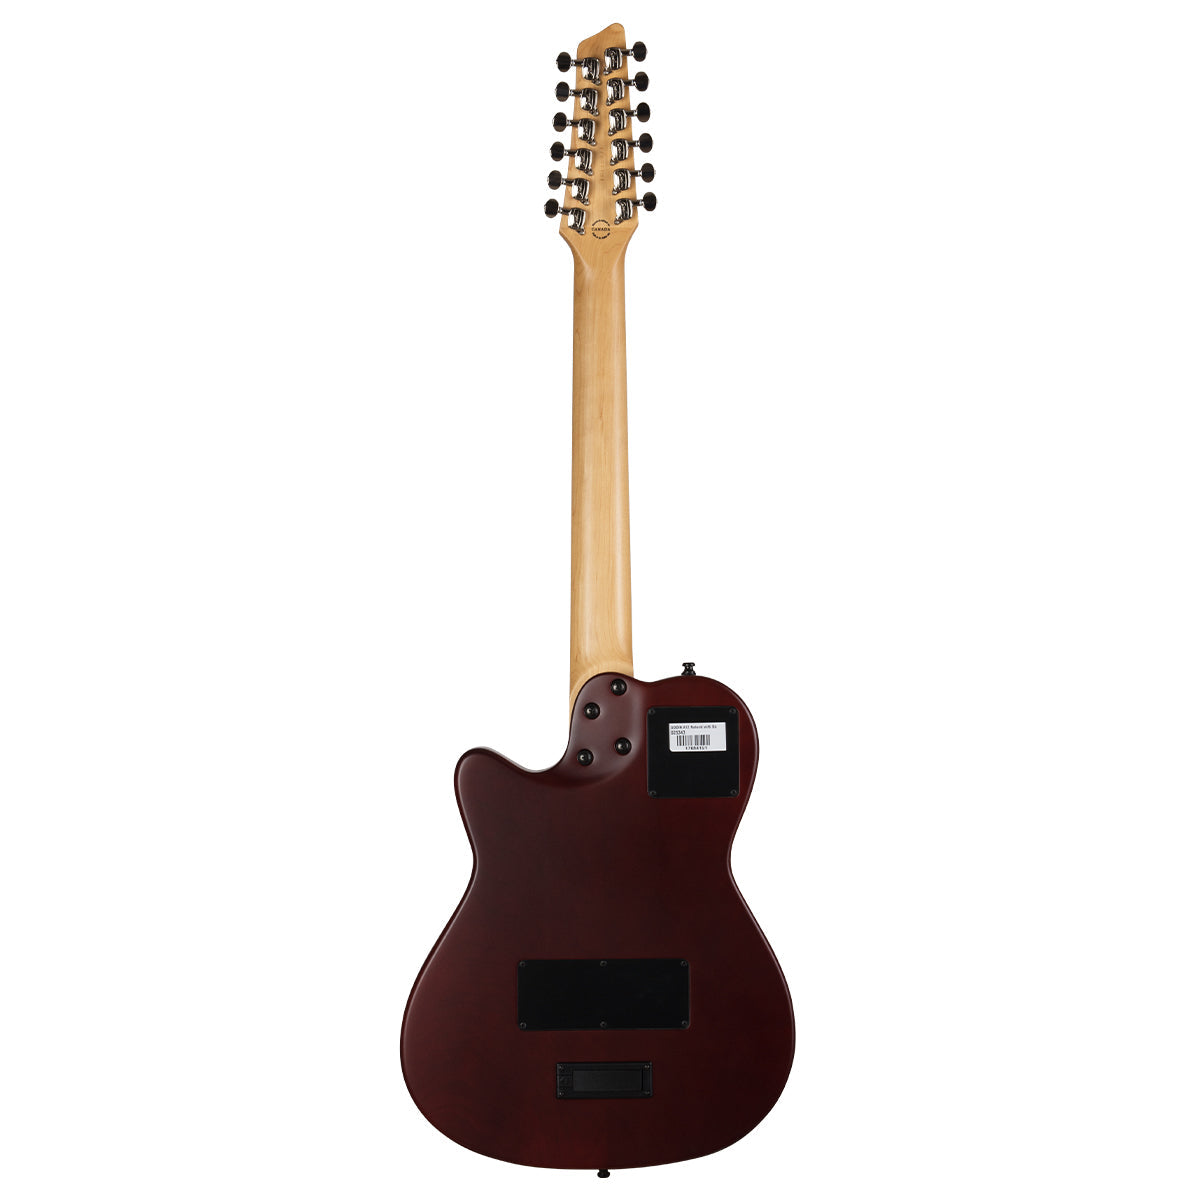 Godin A12 12 String Electric Guitar ~ Natural, Electric Guitars for sale at Richards Guitars.